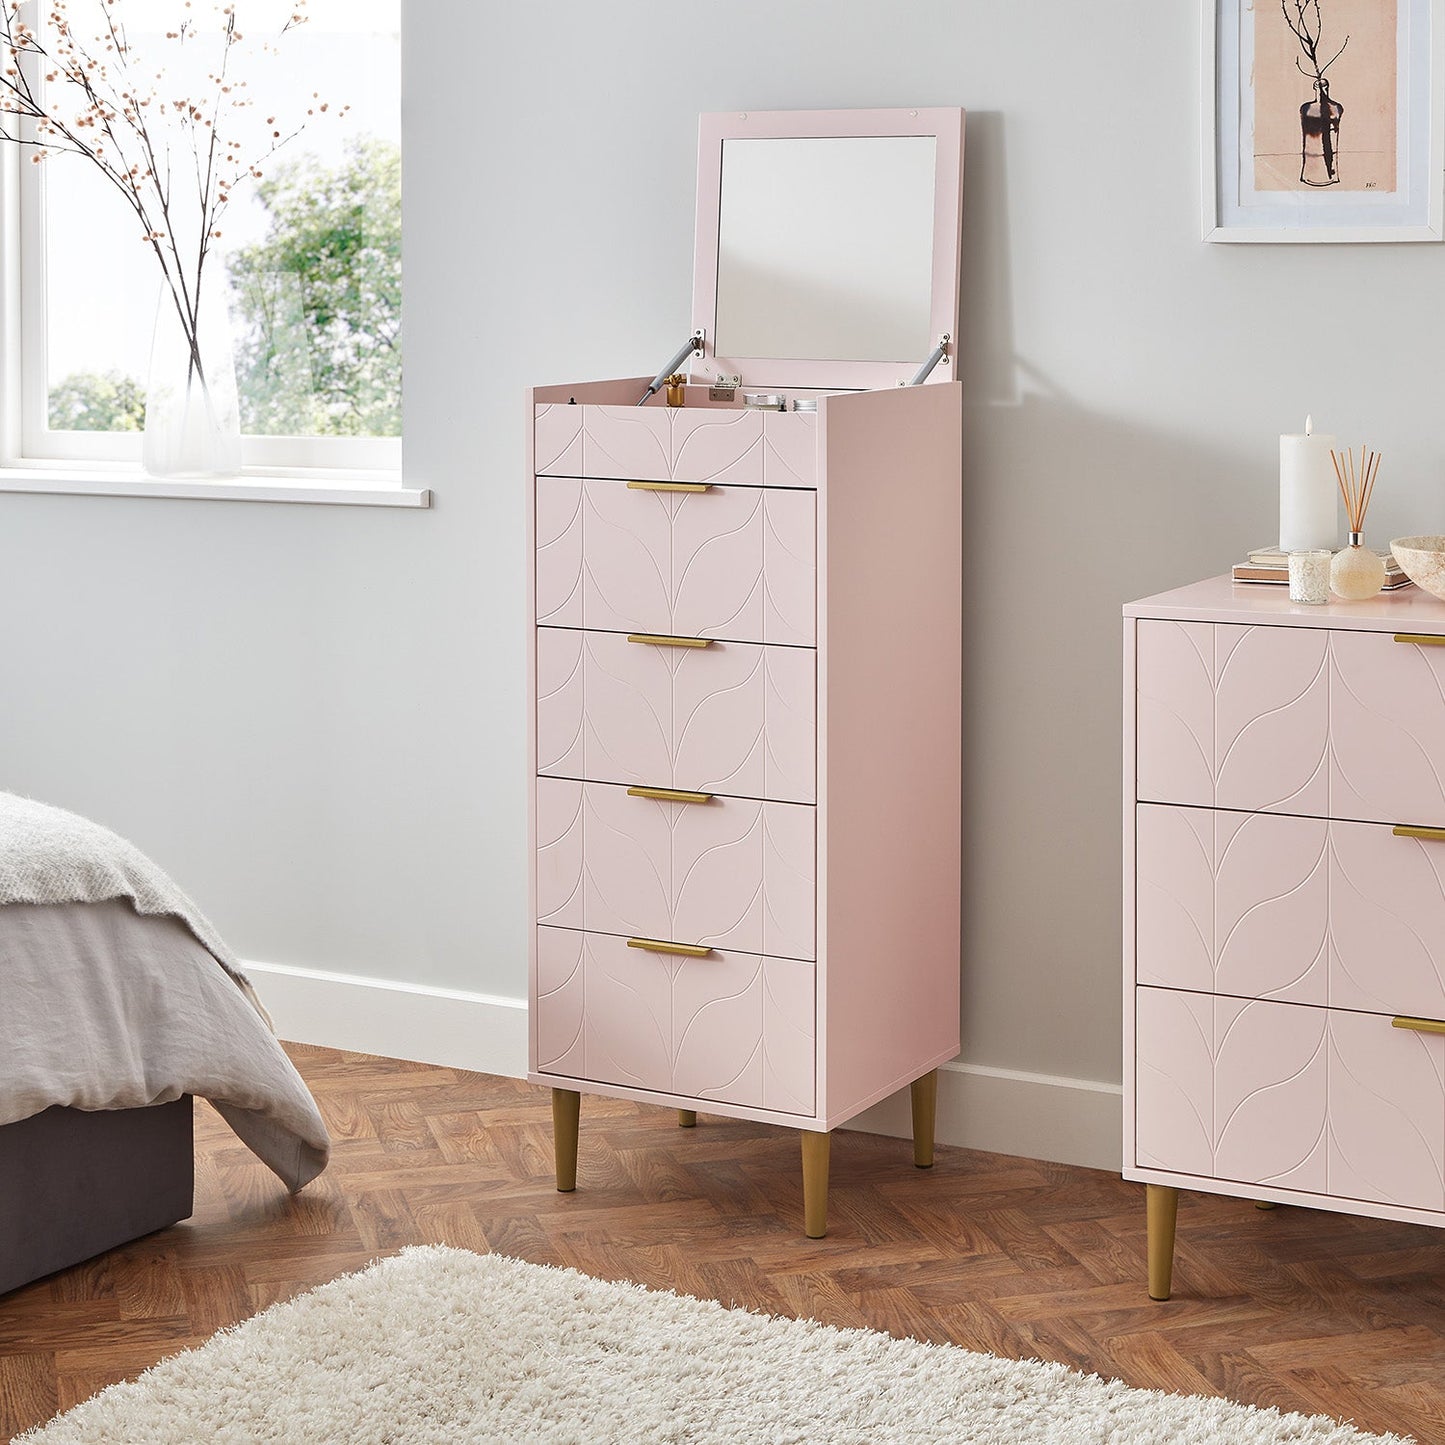 Gloria tallboy - pale pink and brass effect - Laura james